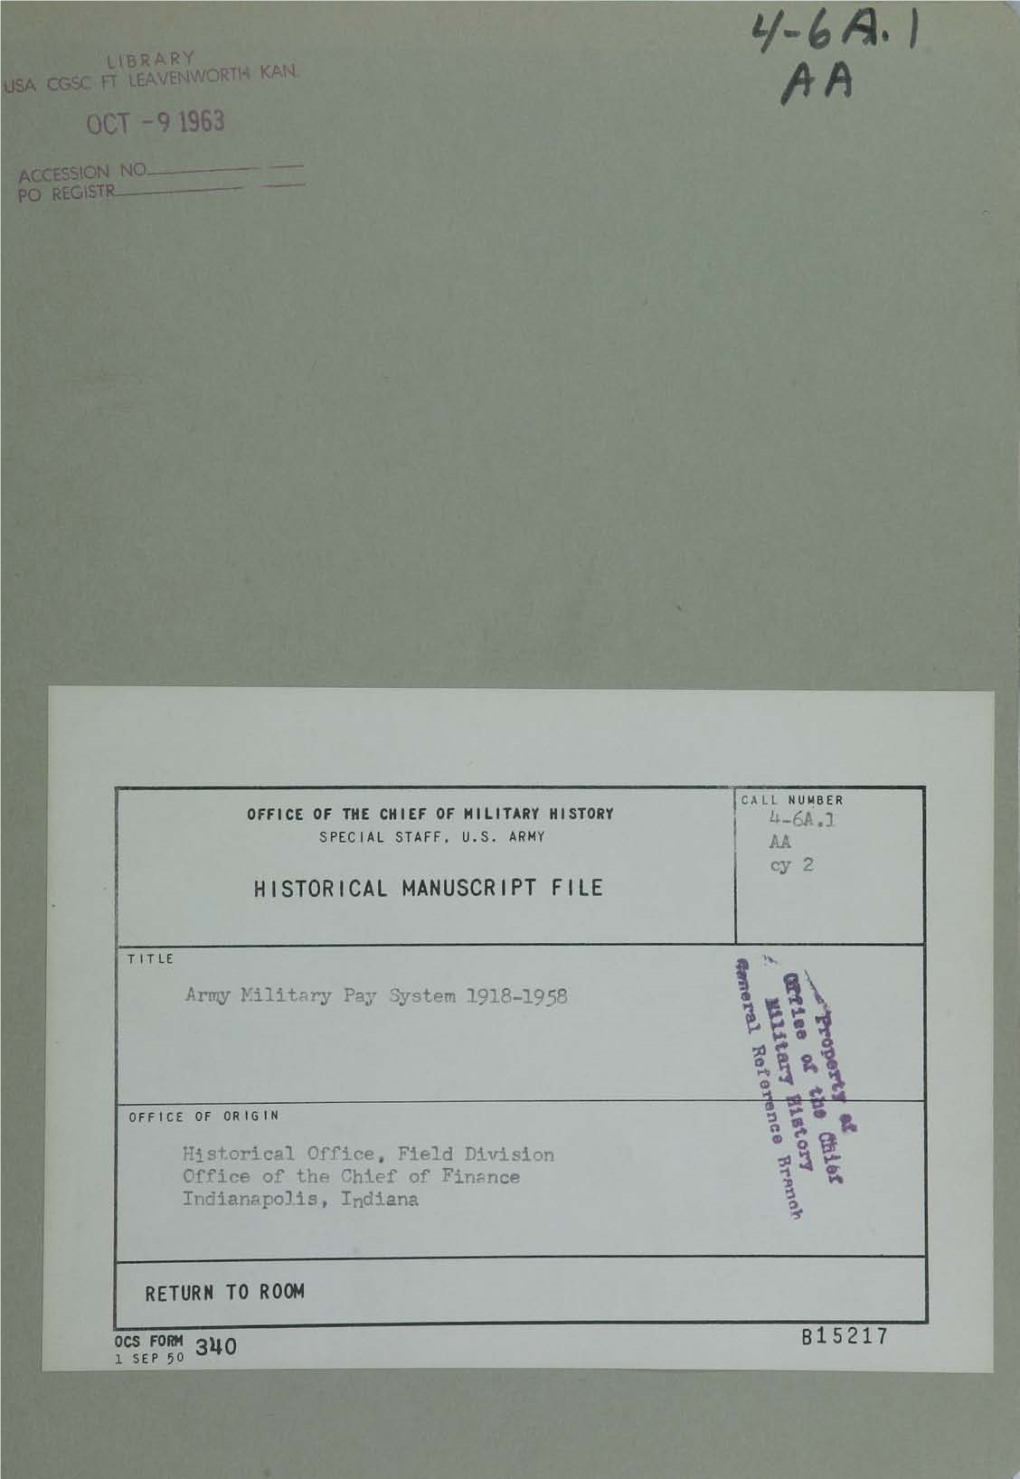 Army Military Pay Systems, 1918-1958 (Historical Summary Of